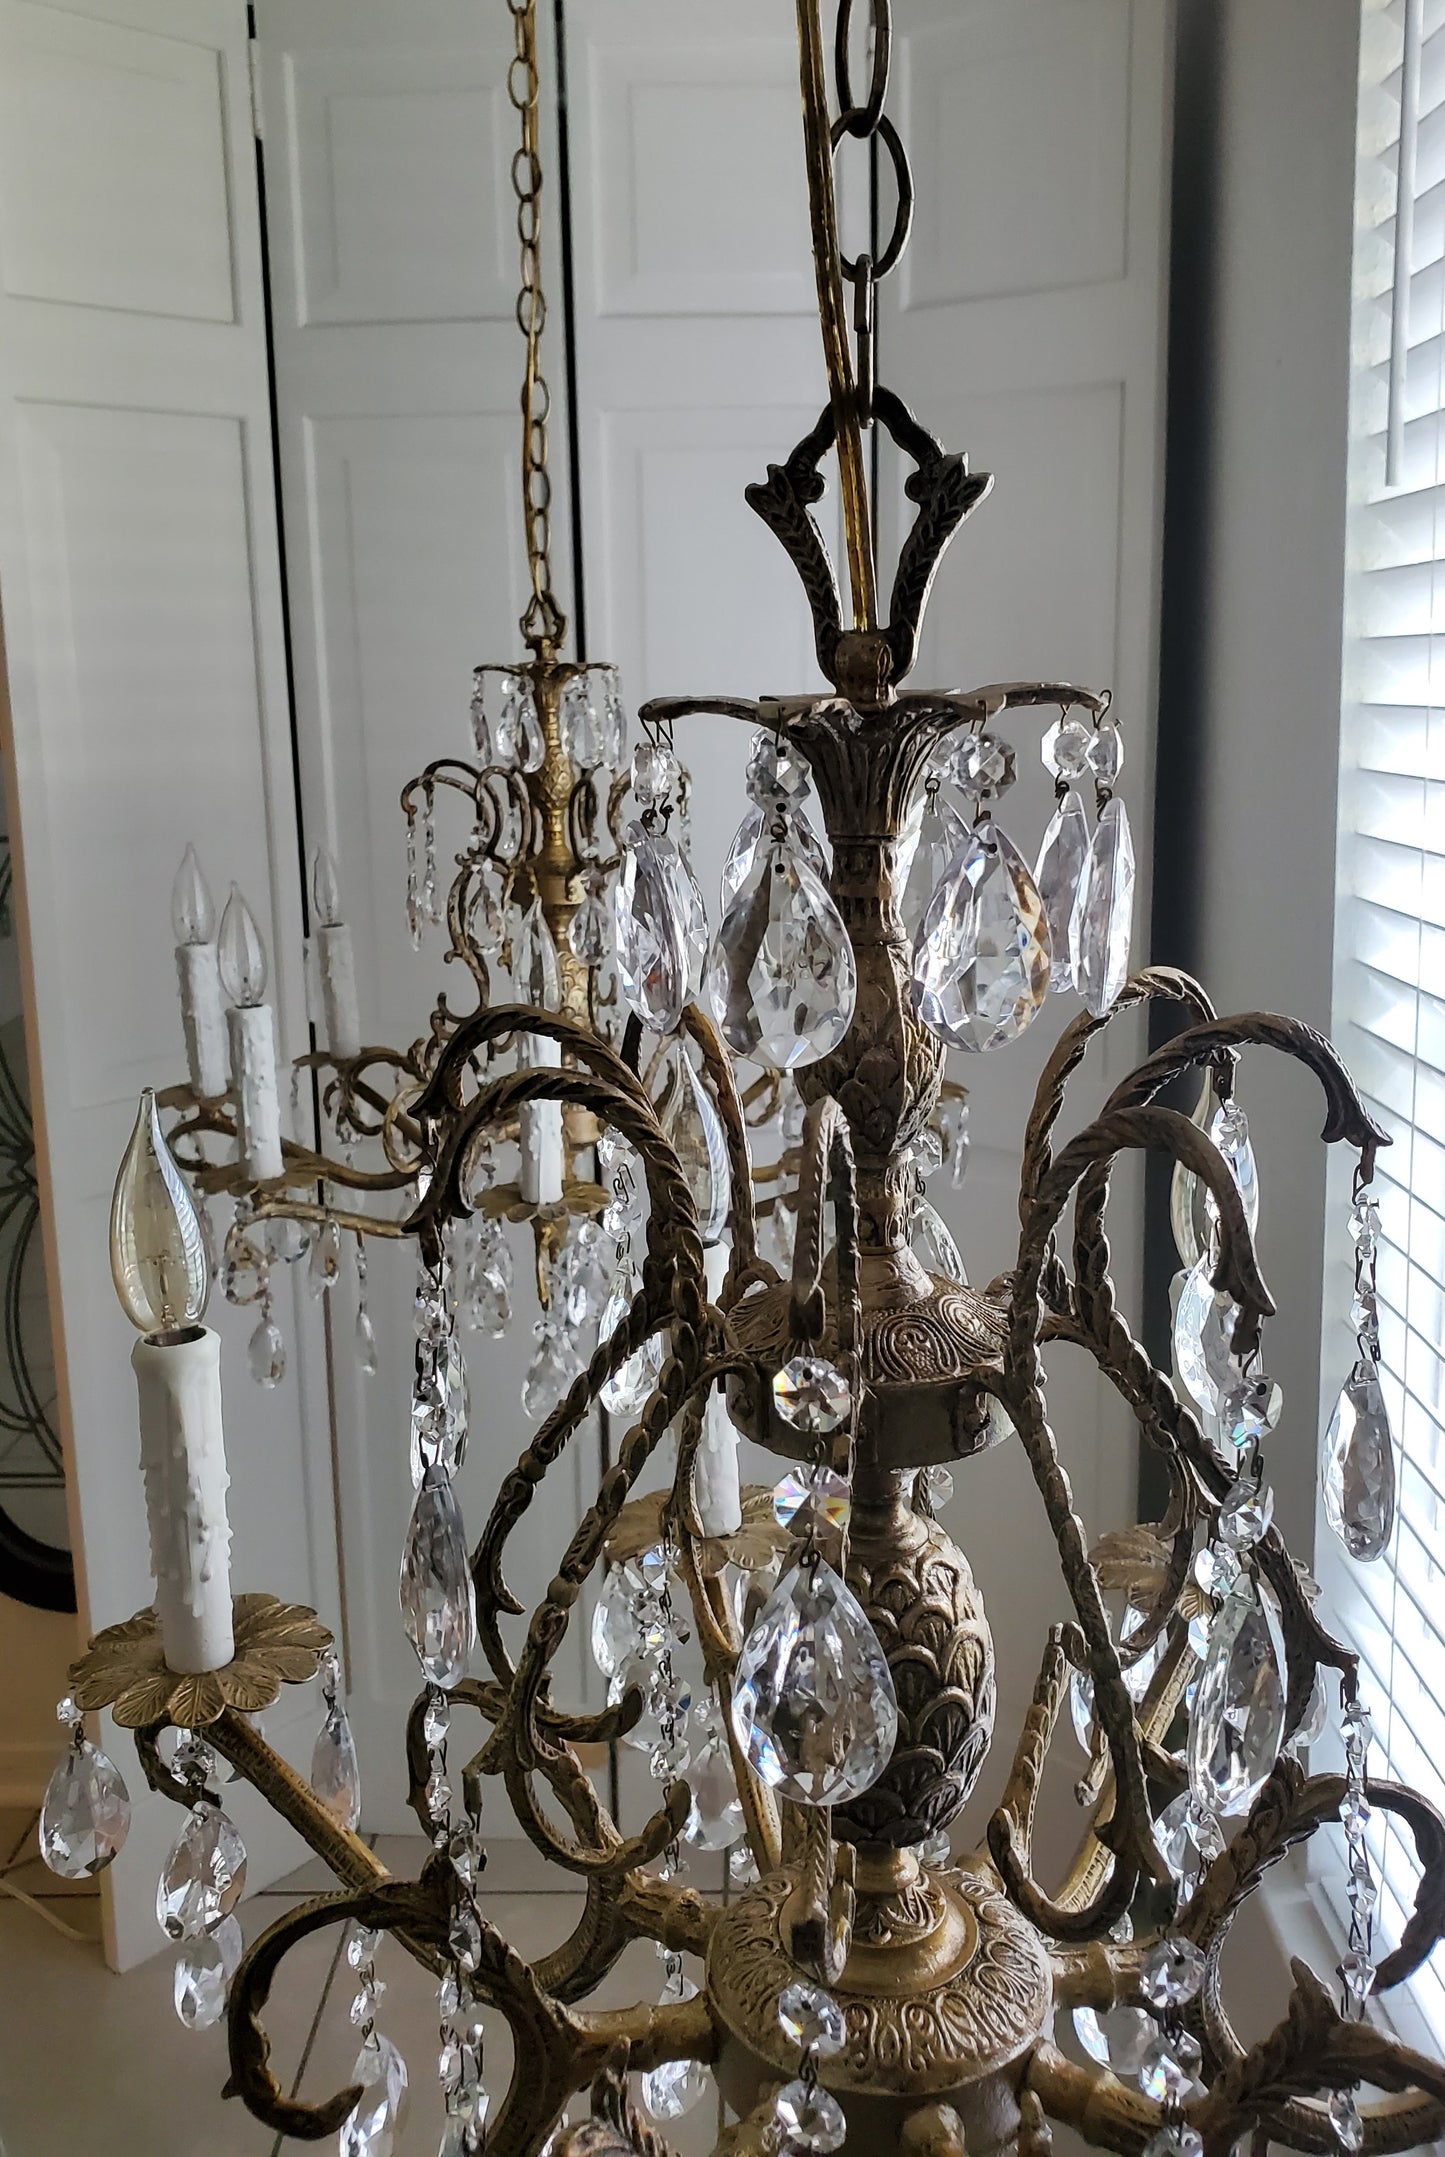 Crystal Chandelier 1950s Handpainted "Shabby Chic White" 8-light (FREE SHIPPING)